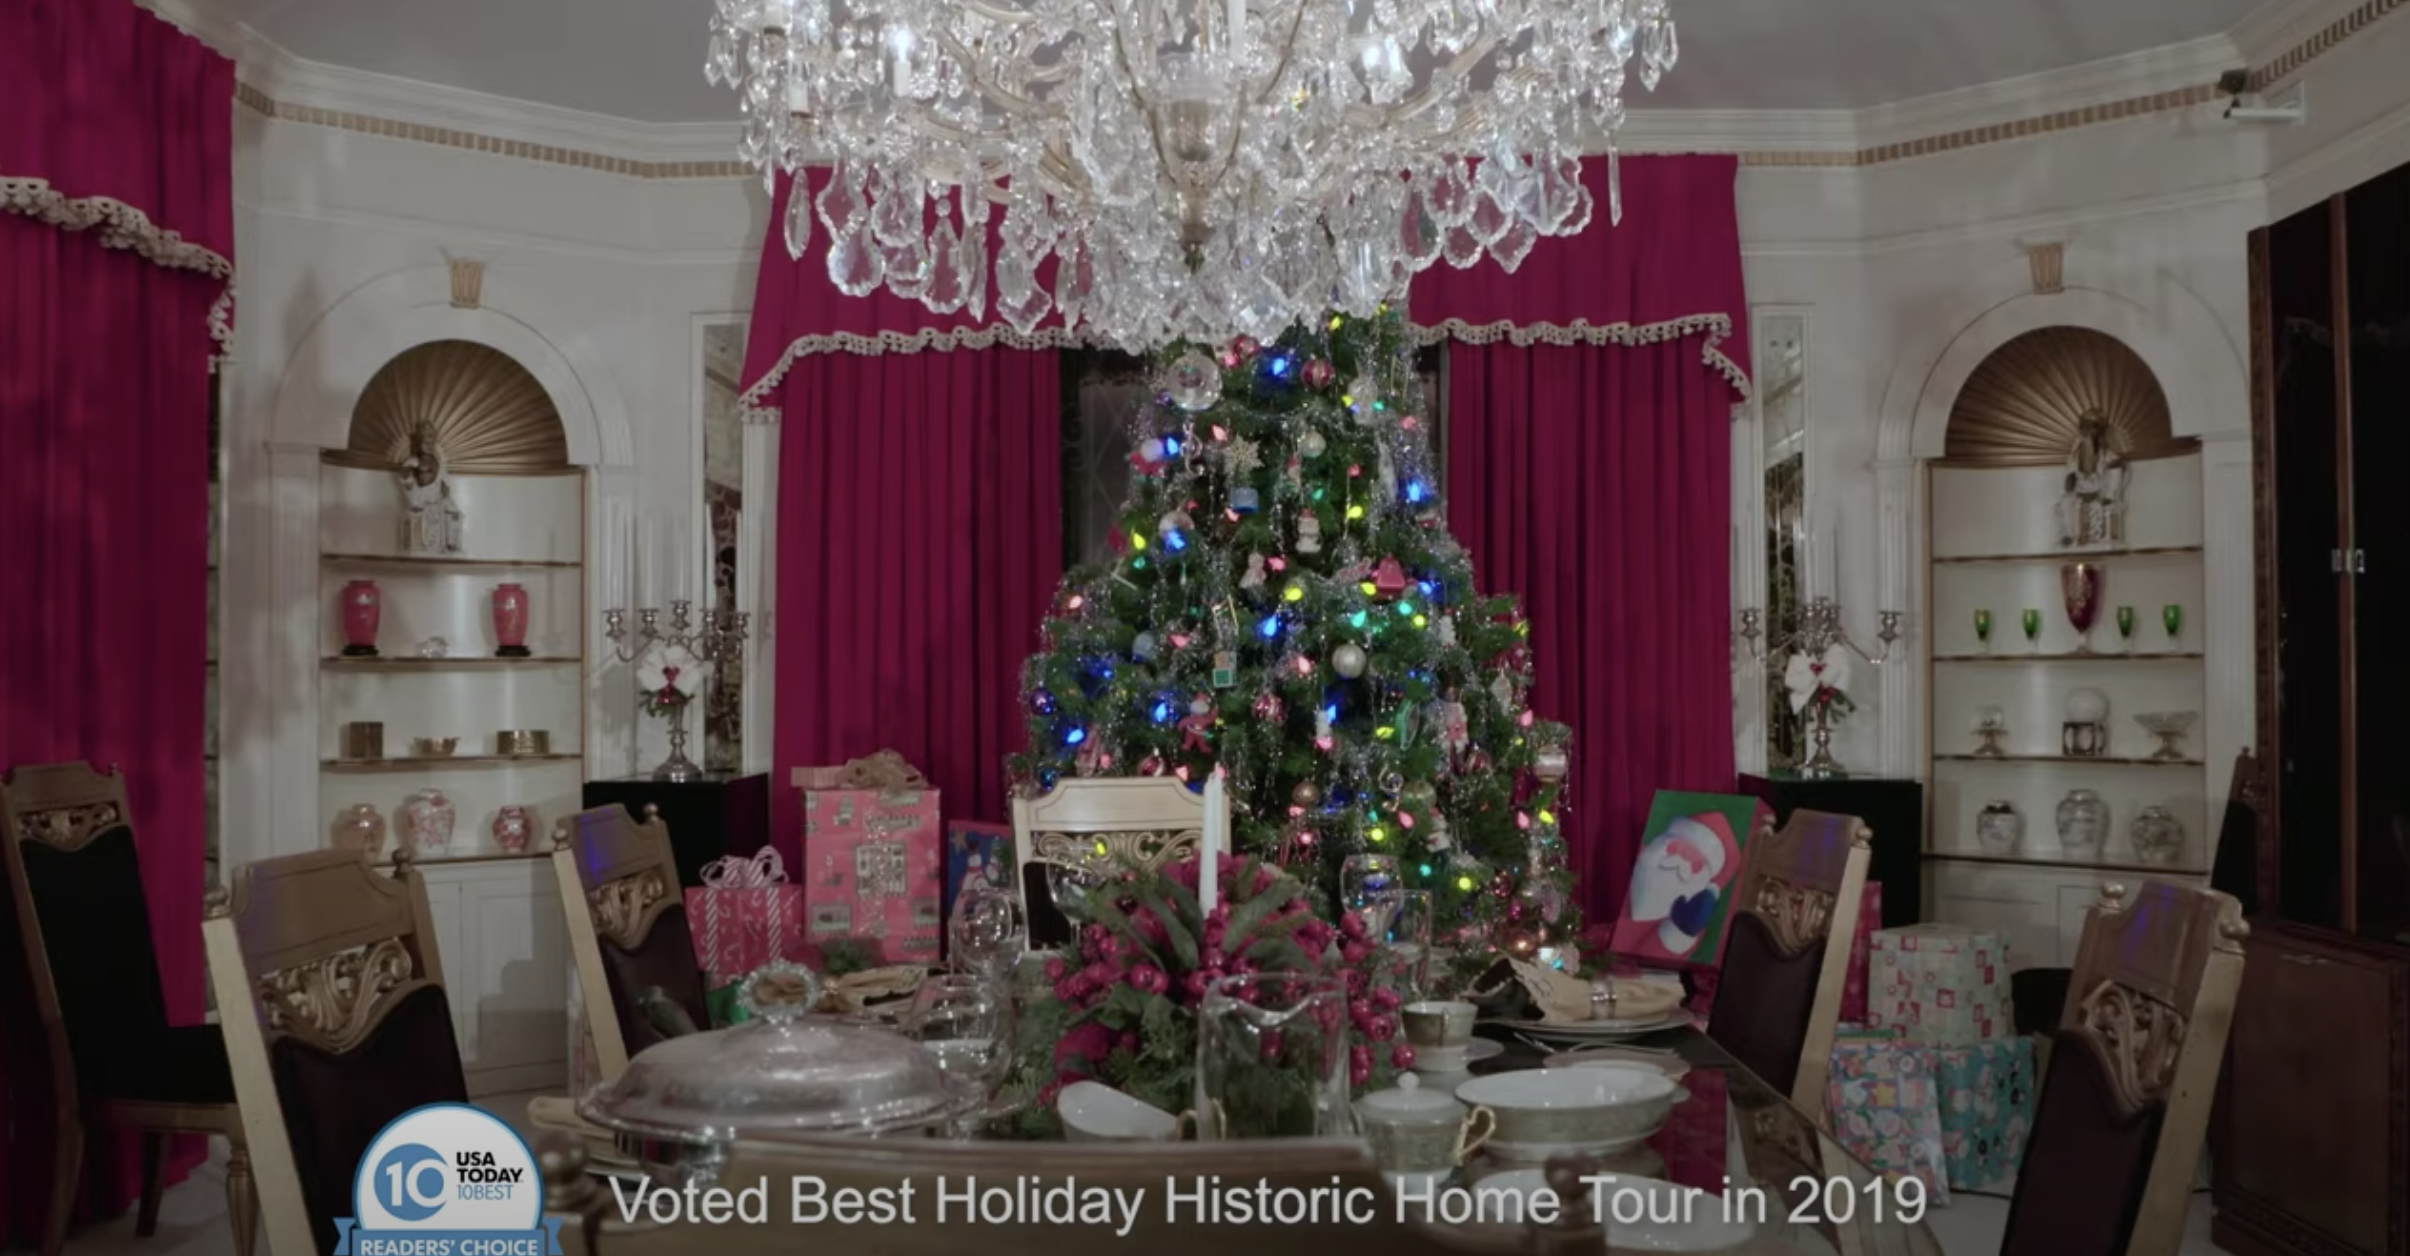 Check Out This New Sneak Peek Video Of A Graceland Christmas